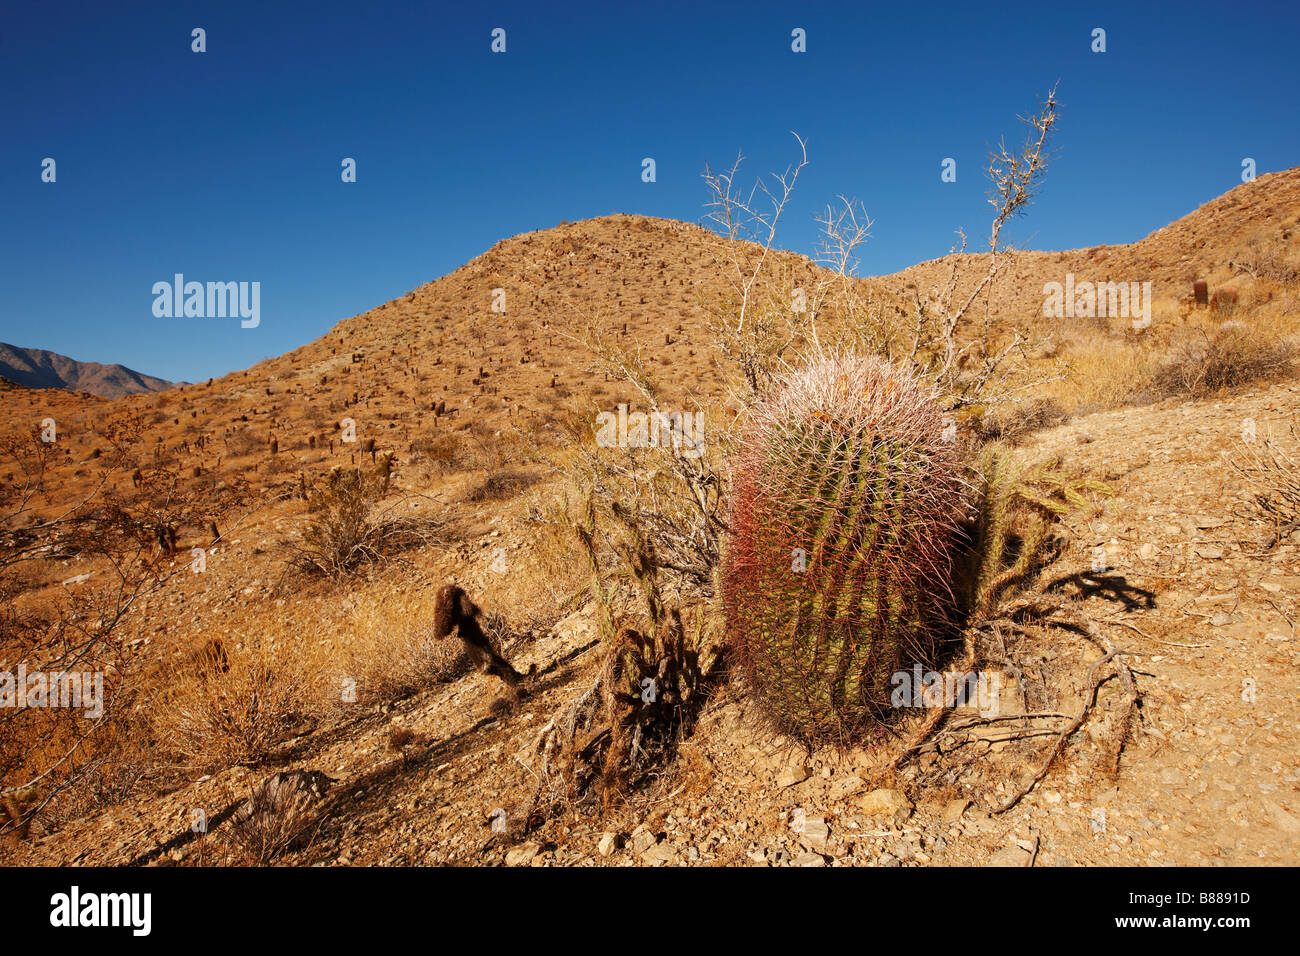 Red Barrel Cactus in Palm Canyon. Palm Springs, California, USA. Stock Photo